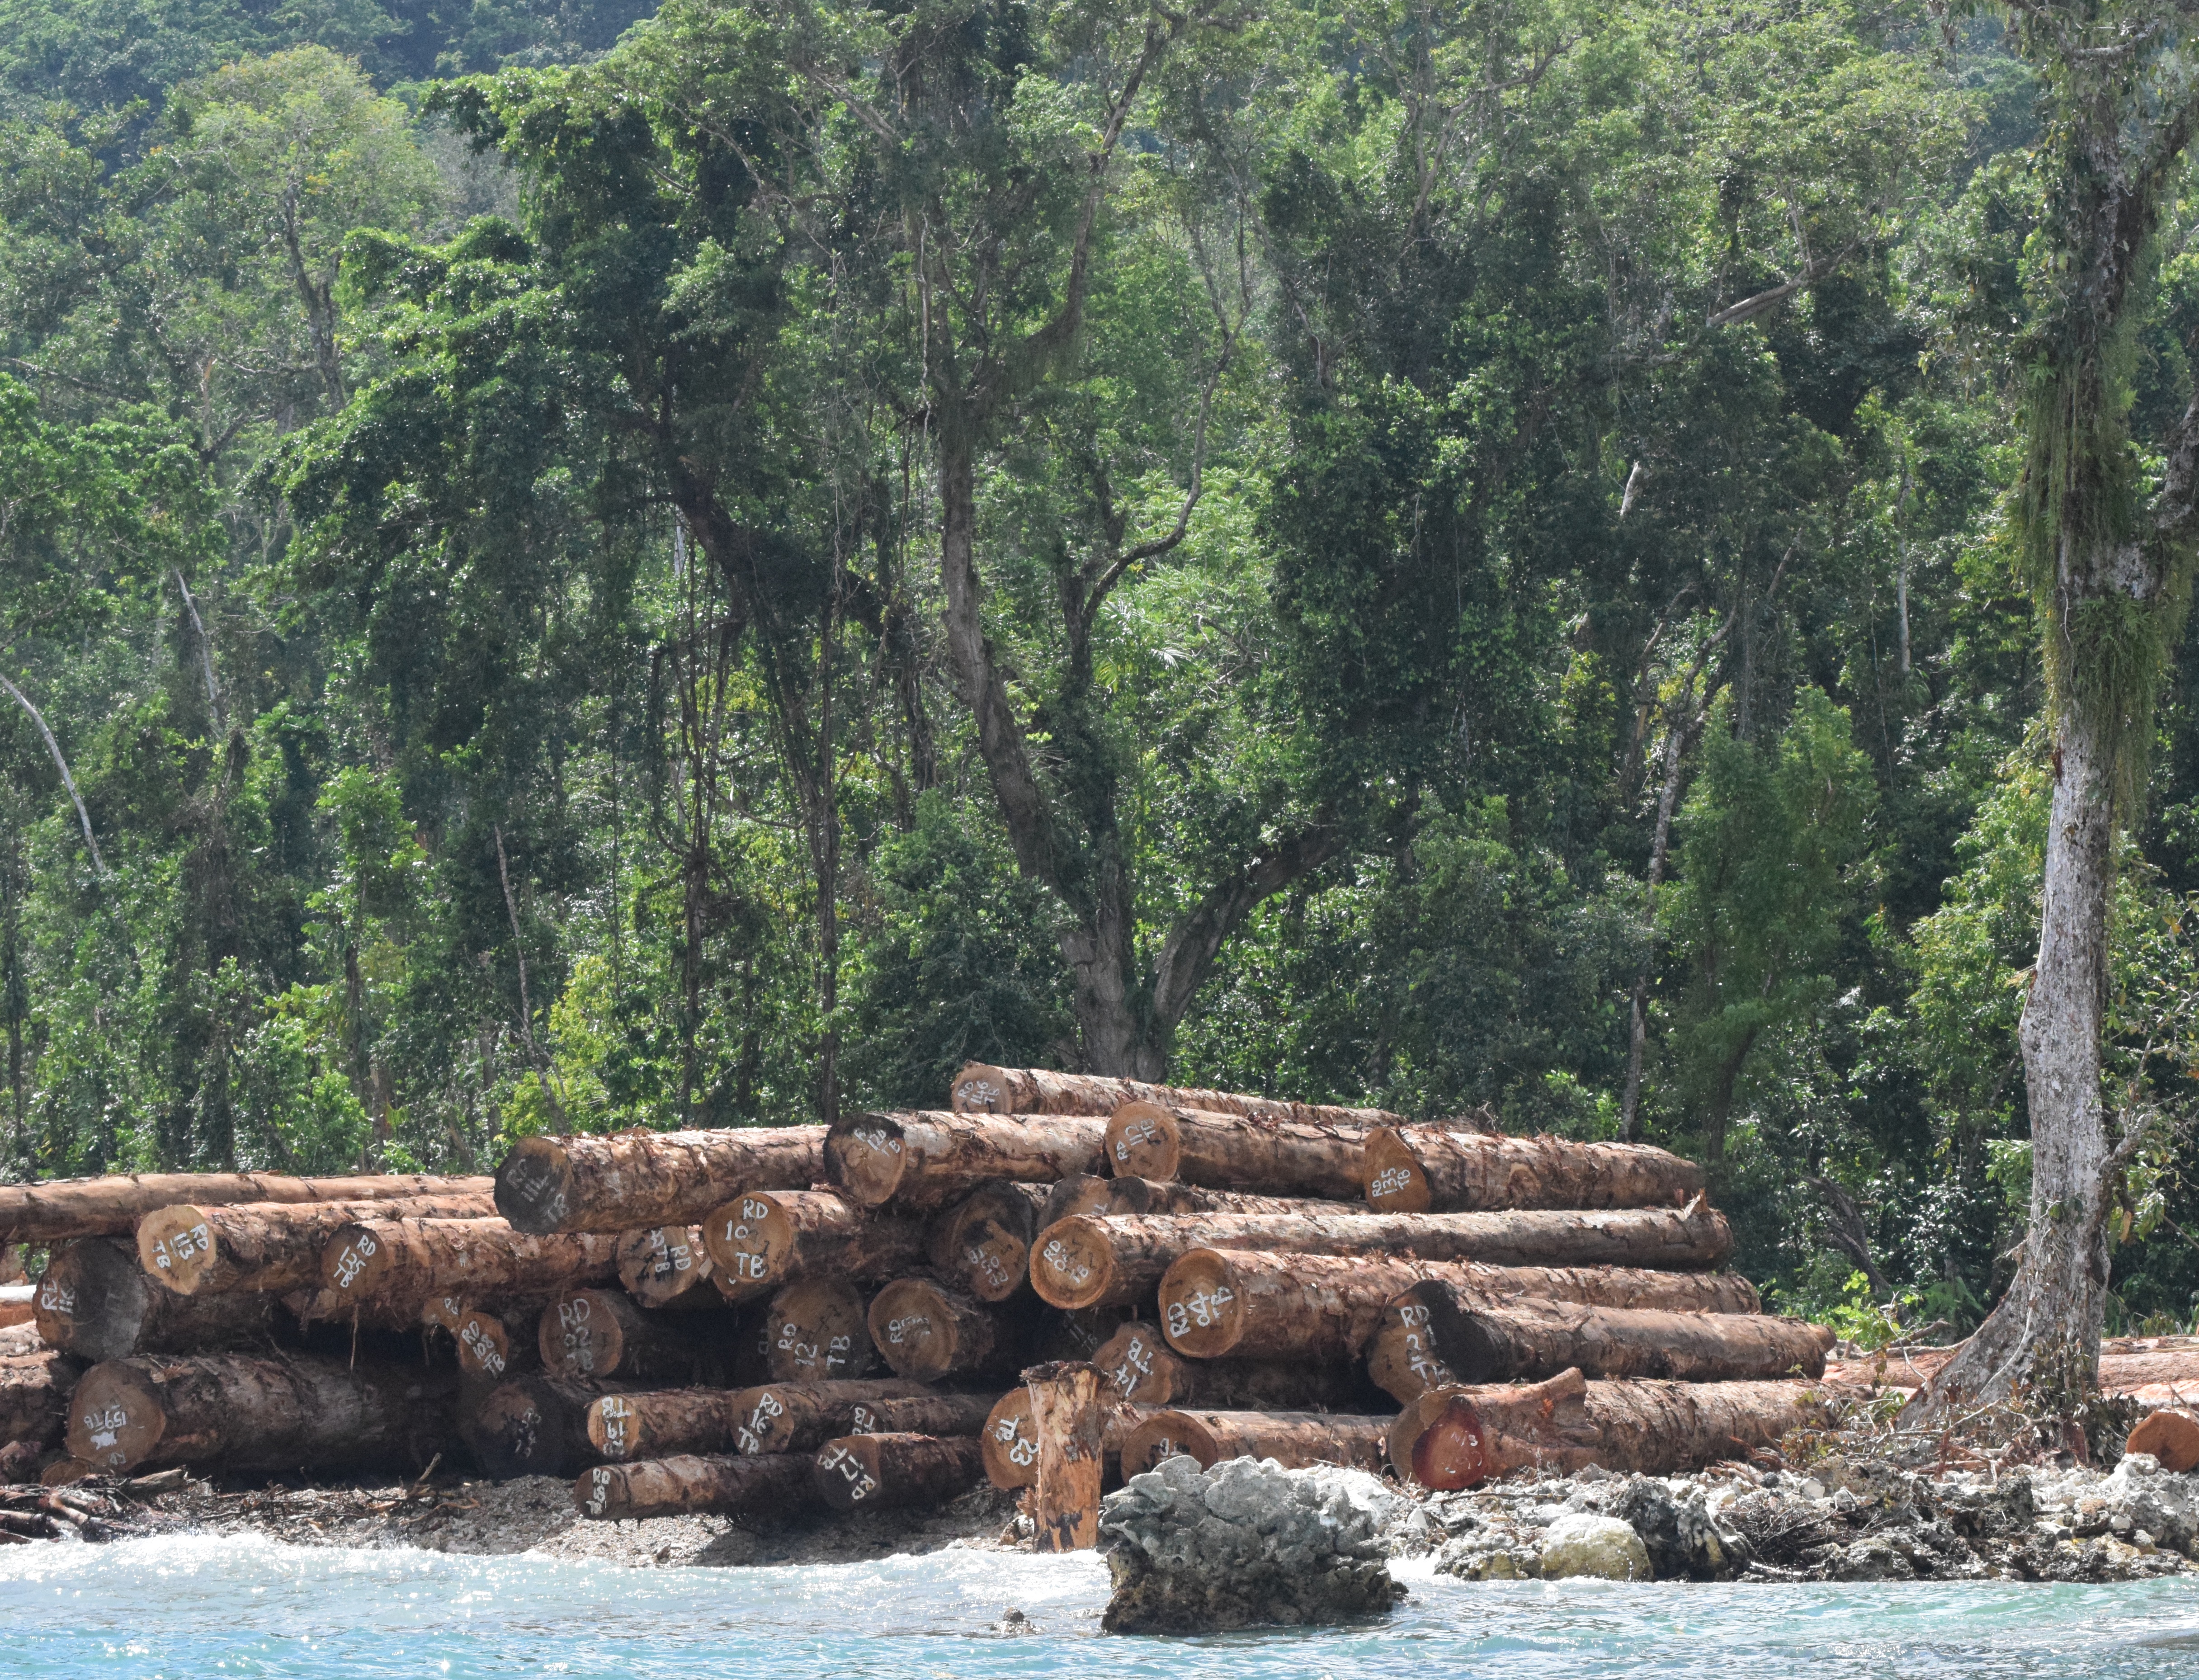 Rural women committed to conservation in Solomon Islands